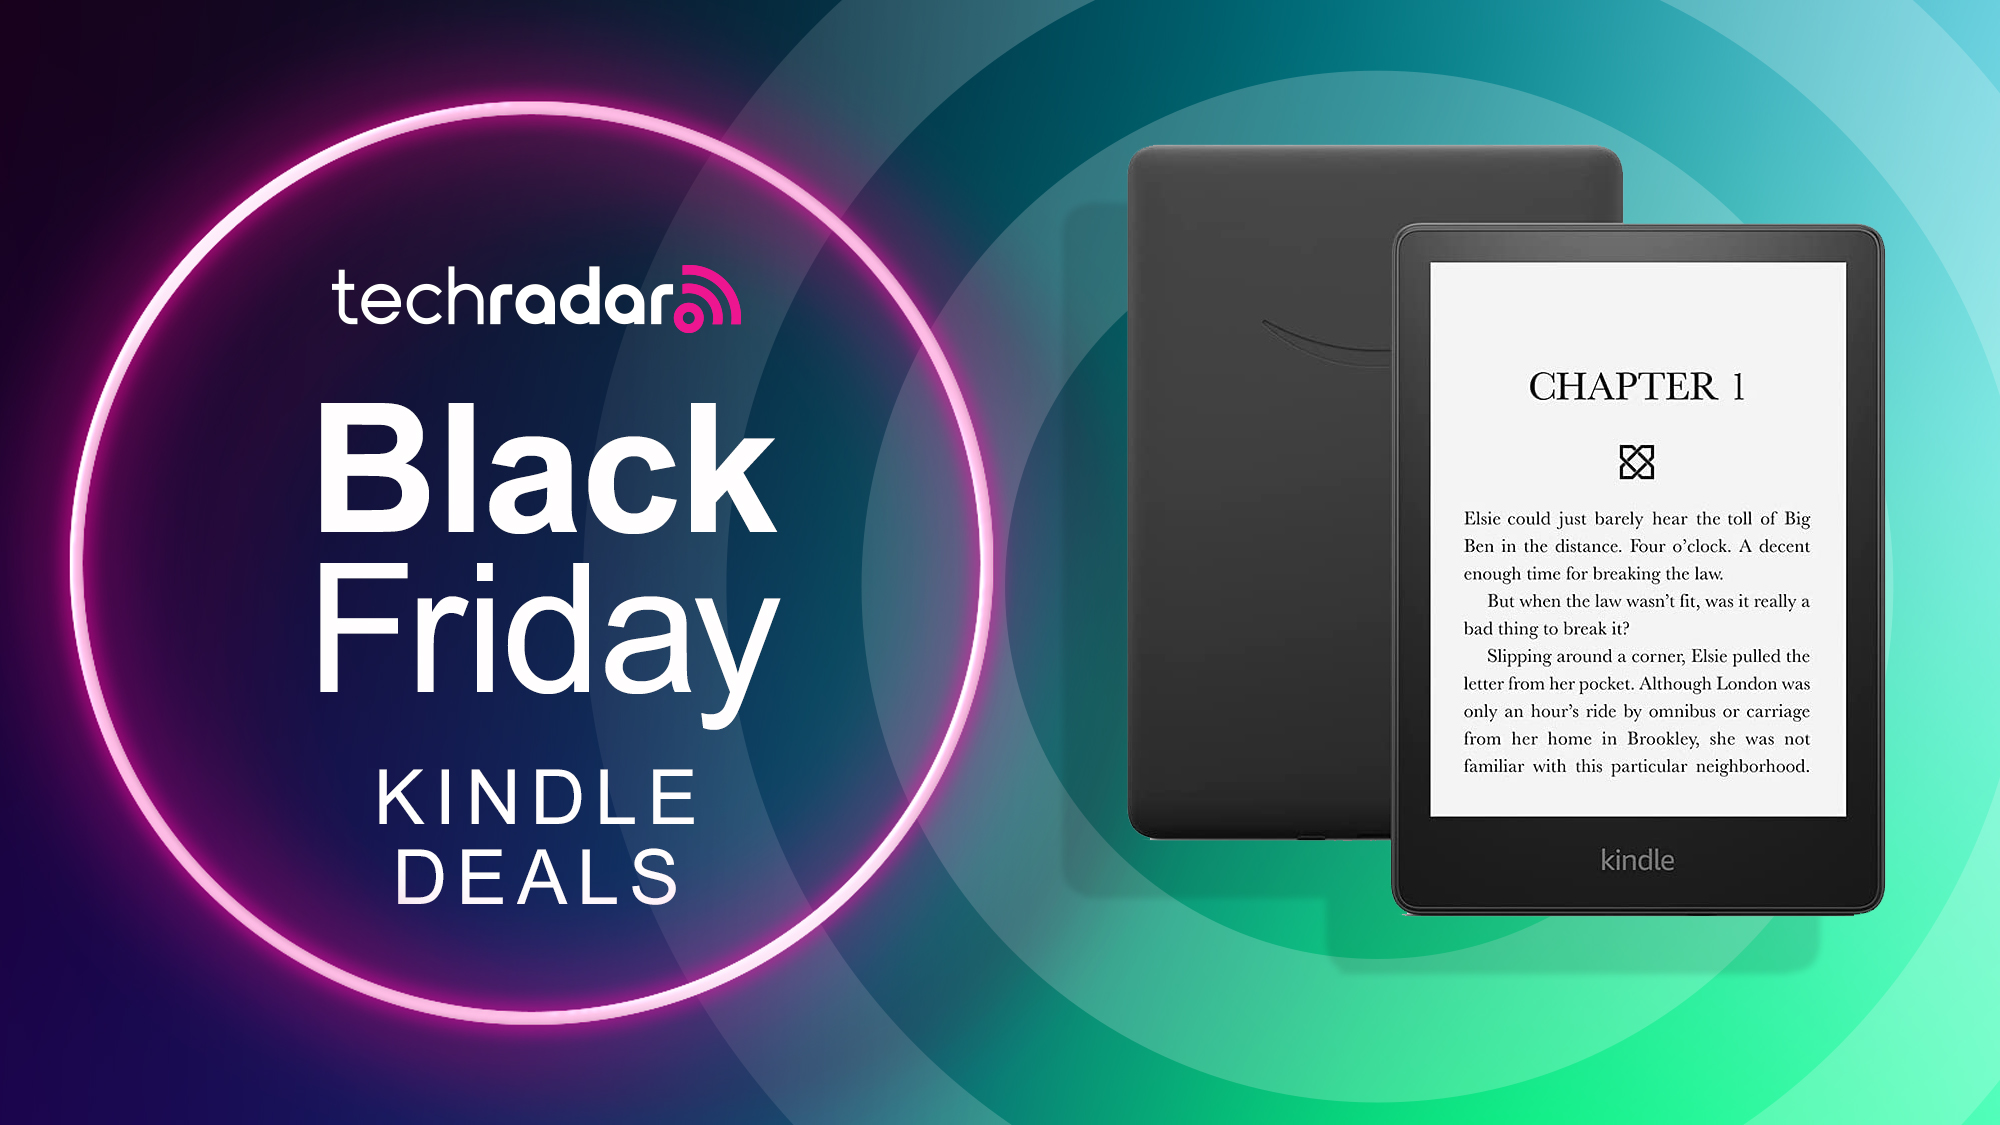 Kindle Paperwhite Signature Edition Essentials Bundle including Kindle  Paperwhite Signature Edition (32 GB), Fabric Cover - Black, and Wireless